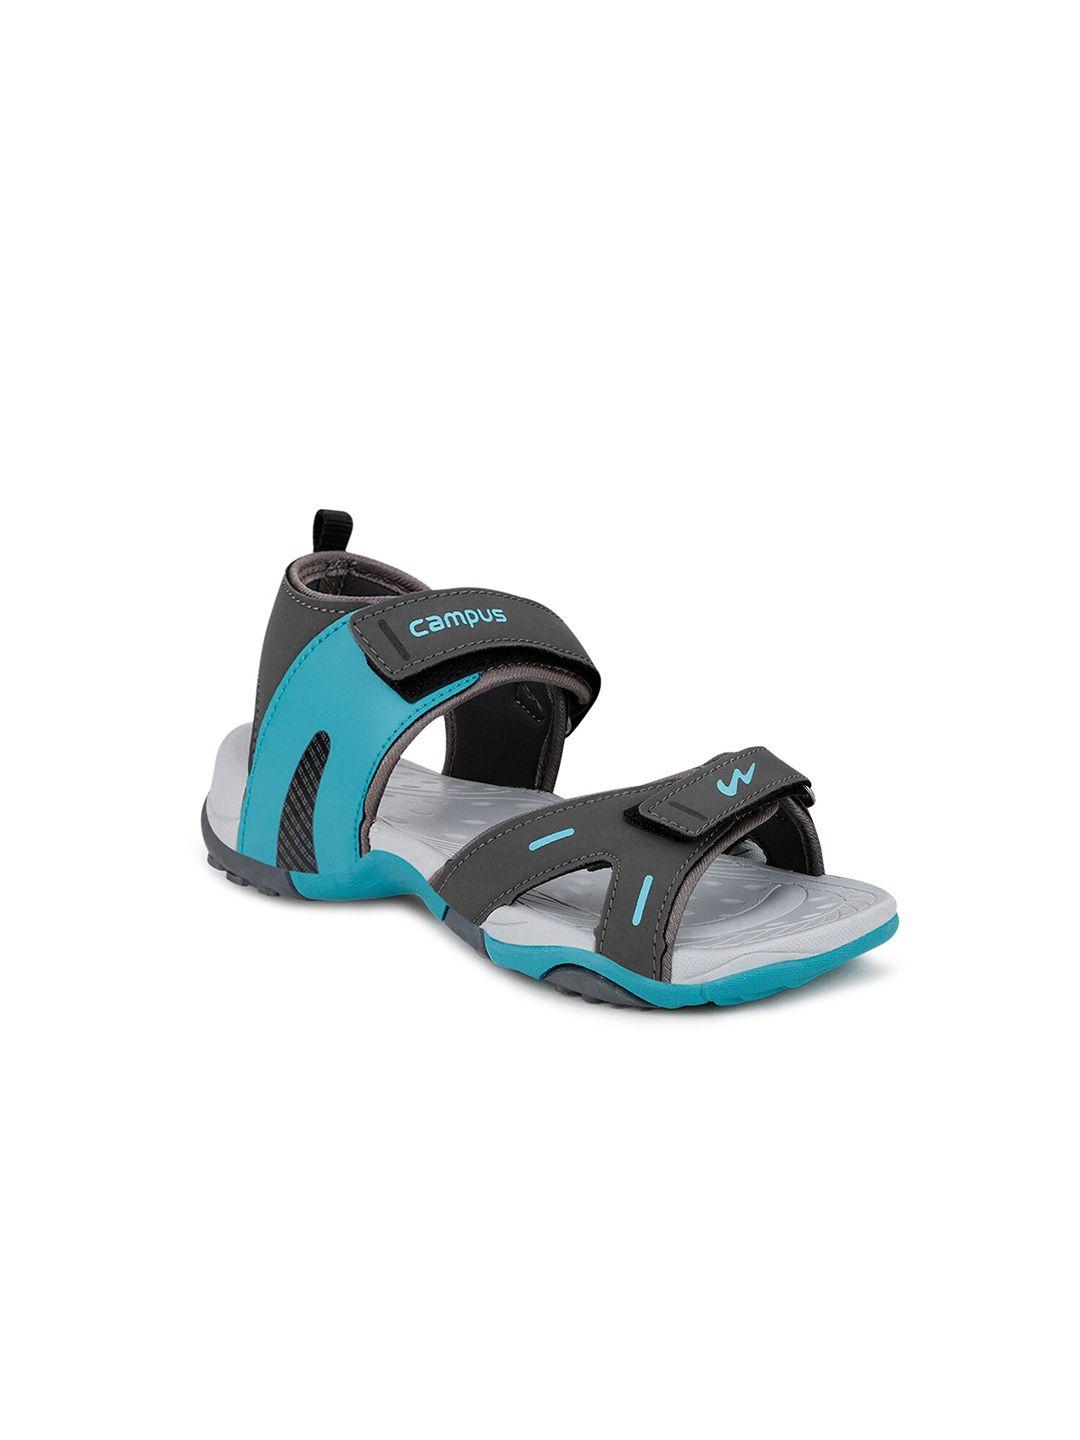 campus kids charcoal & turquoise blue comfort sandals